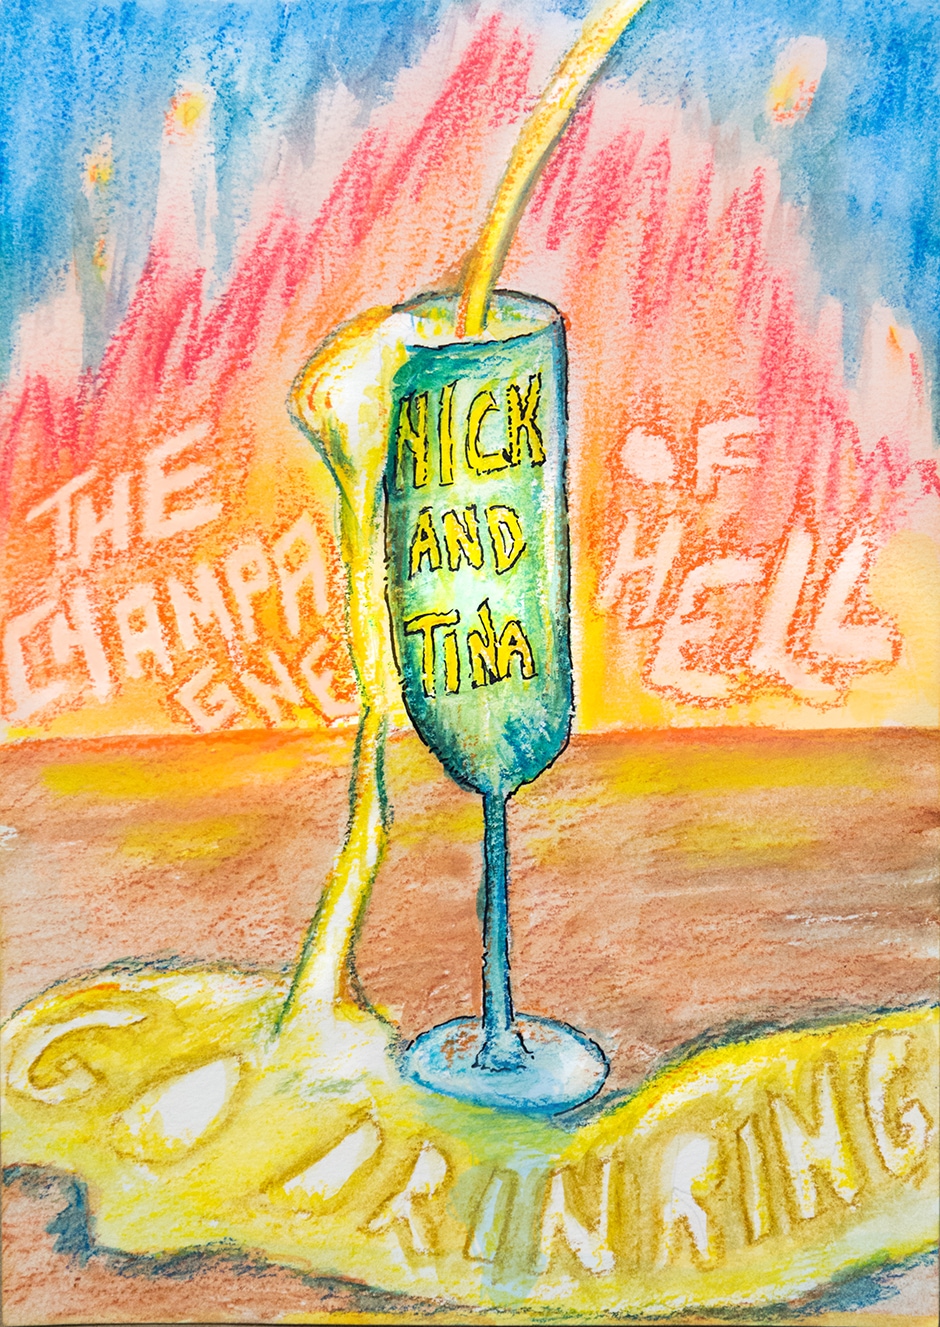 Nick and Tina Go Drinking :: The Champagne of Hell - image 1